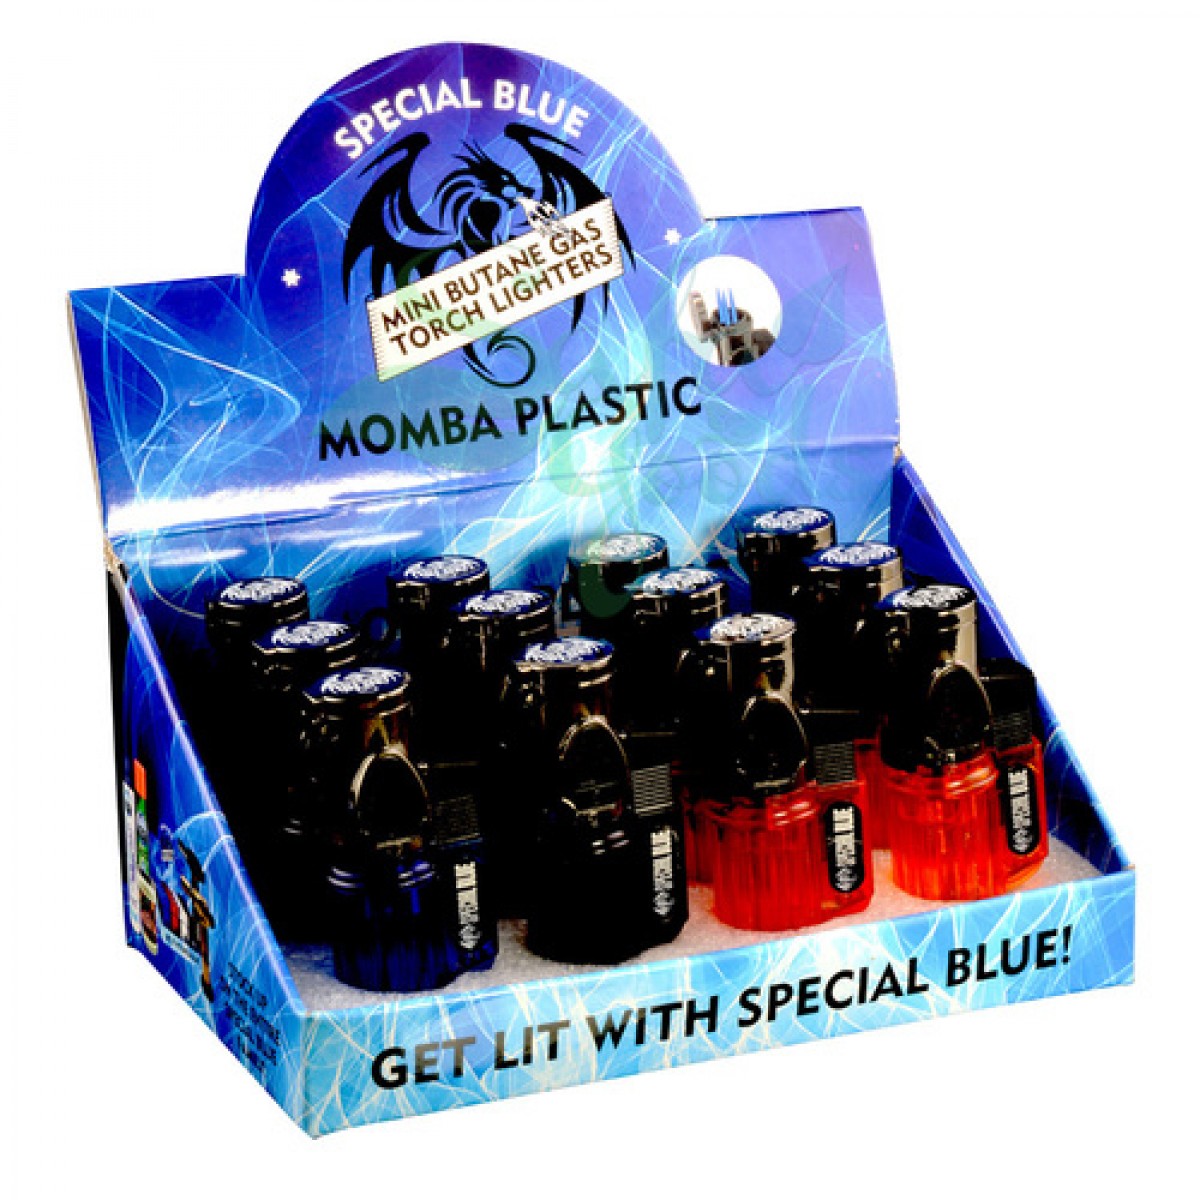 Special Blue - MomBa Plastic Lighter Display - 12PC